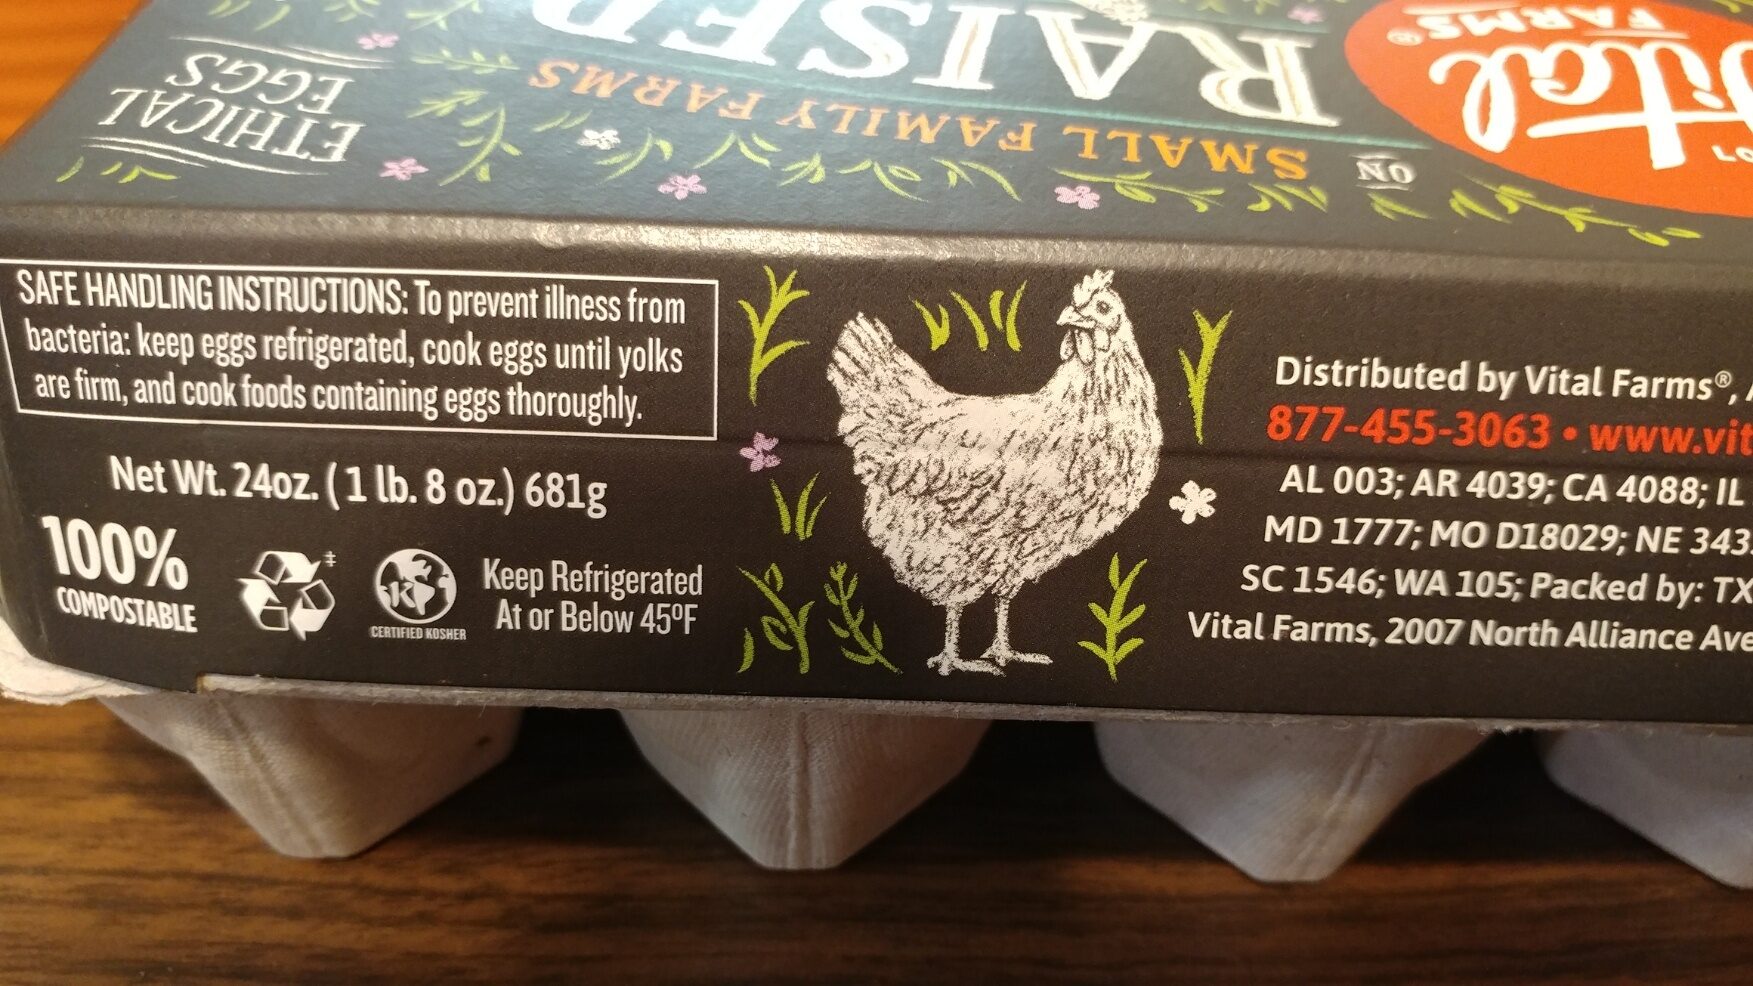 Pasture raised vital farms eggs - Recycling instructions and/or packaging information